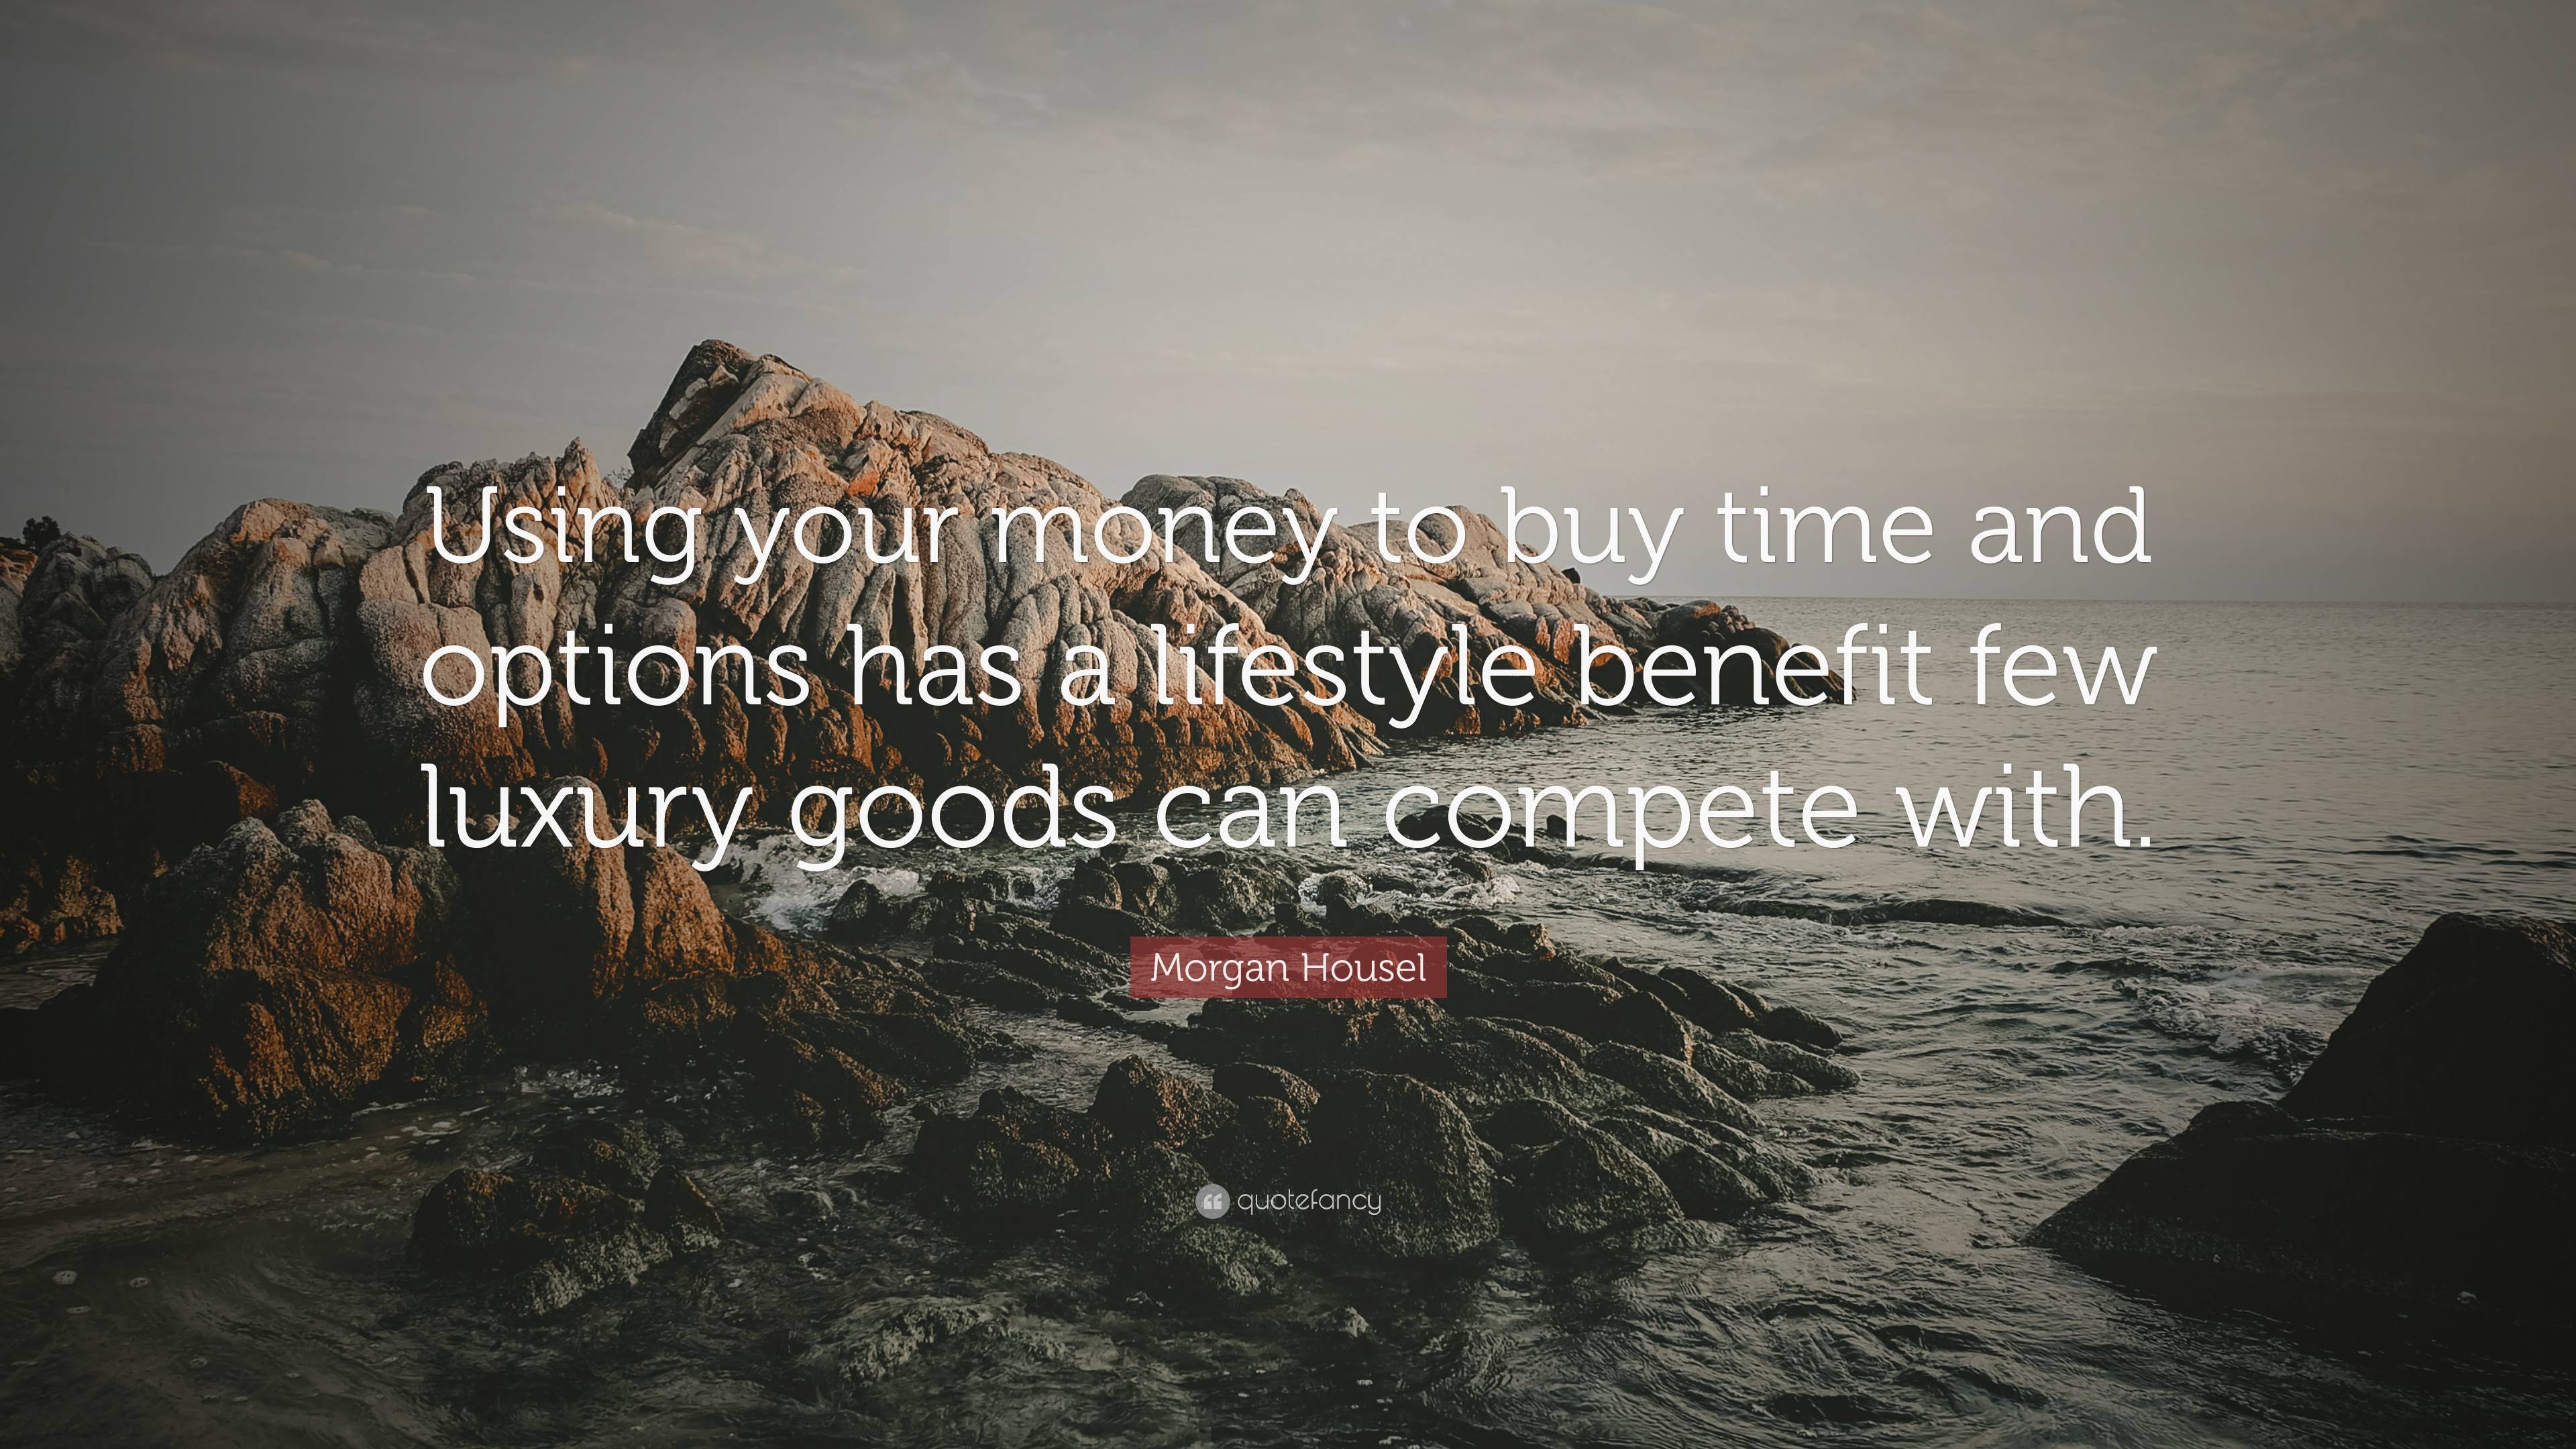 Morgan Housel Quote “using Your Money To Buy Time And Options Has A Lifestyle Benefit Few 8009